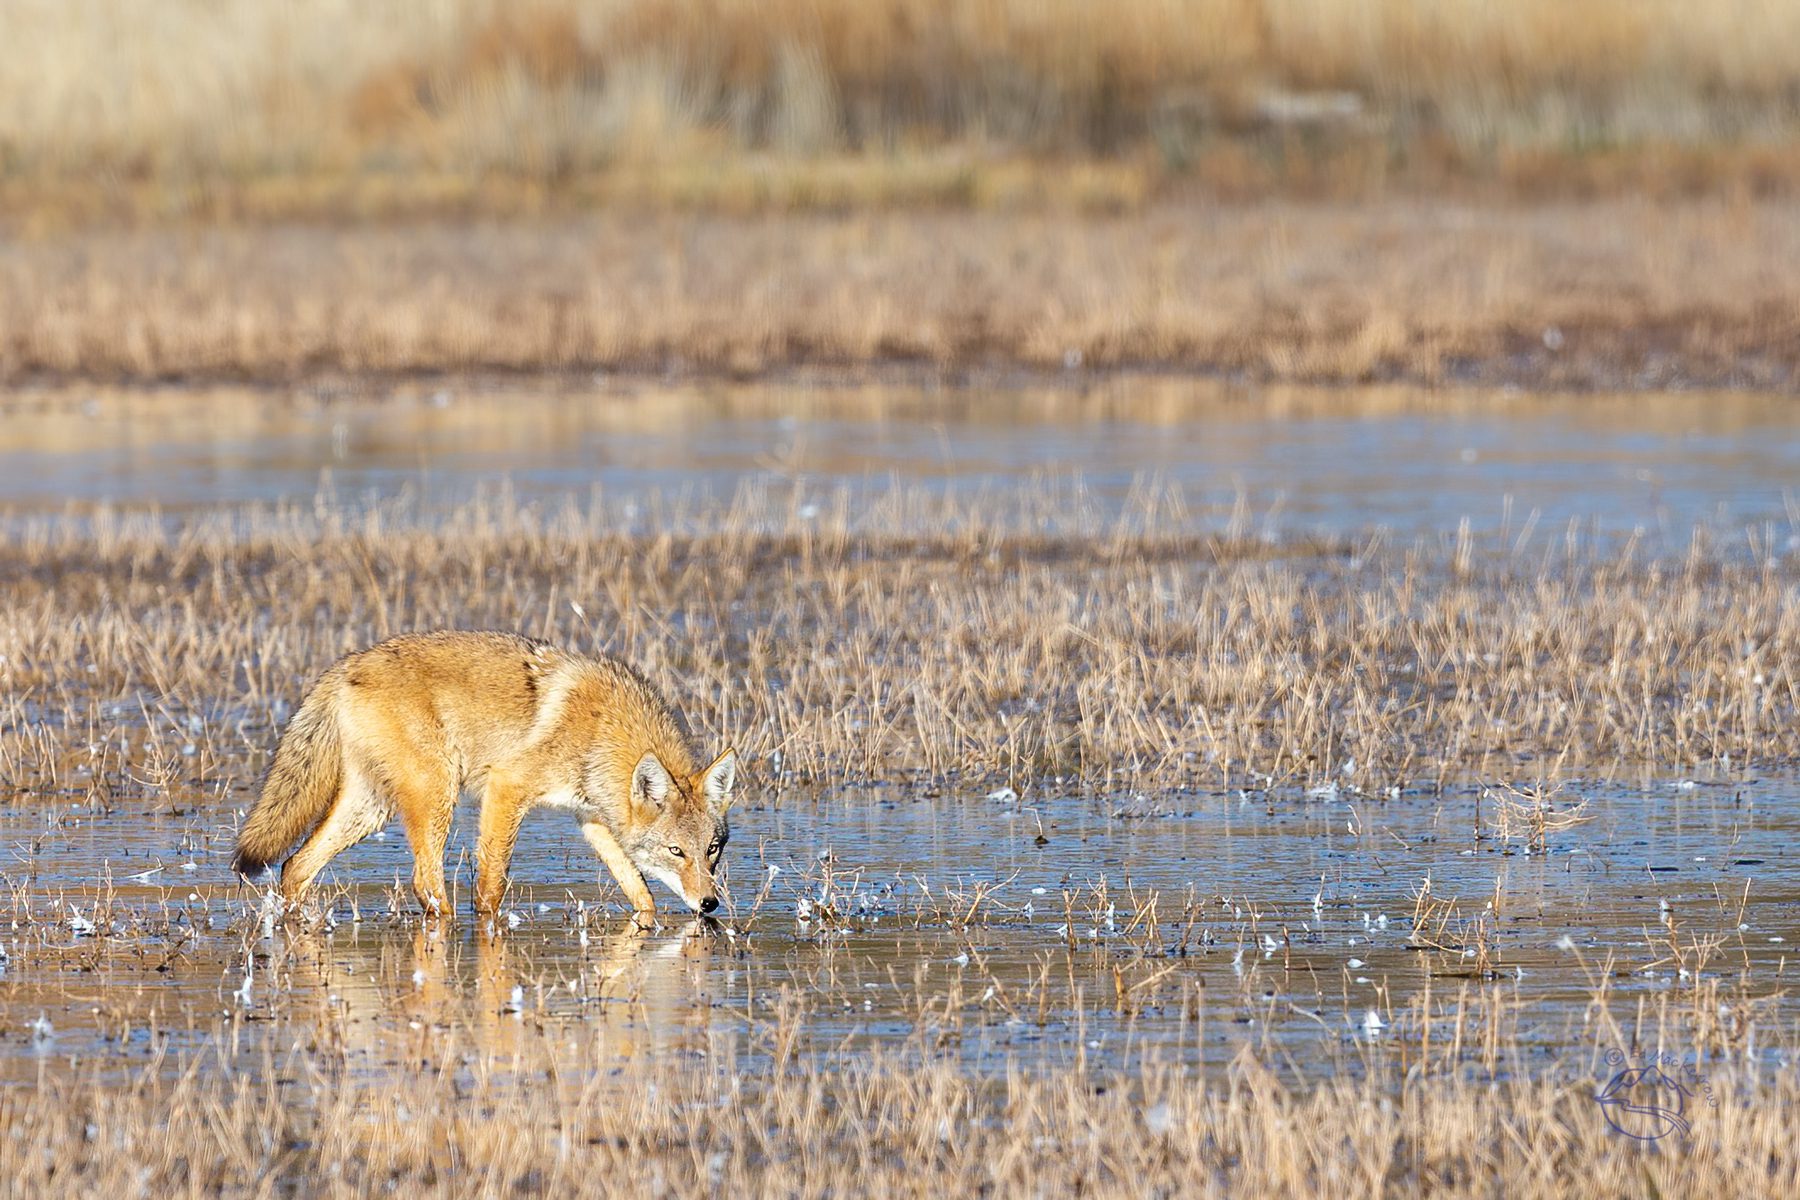 Coyote in pond at the Bosque del Apache hunting ducks